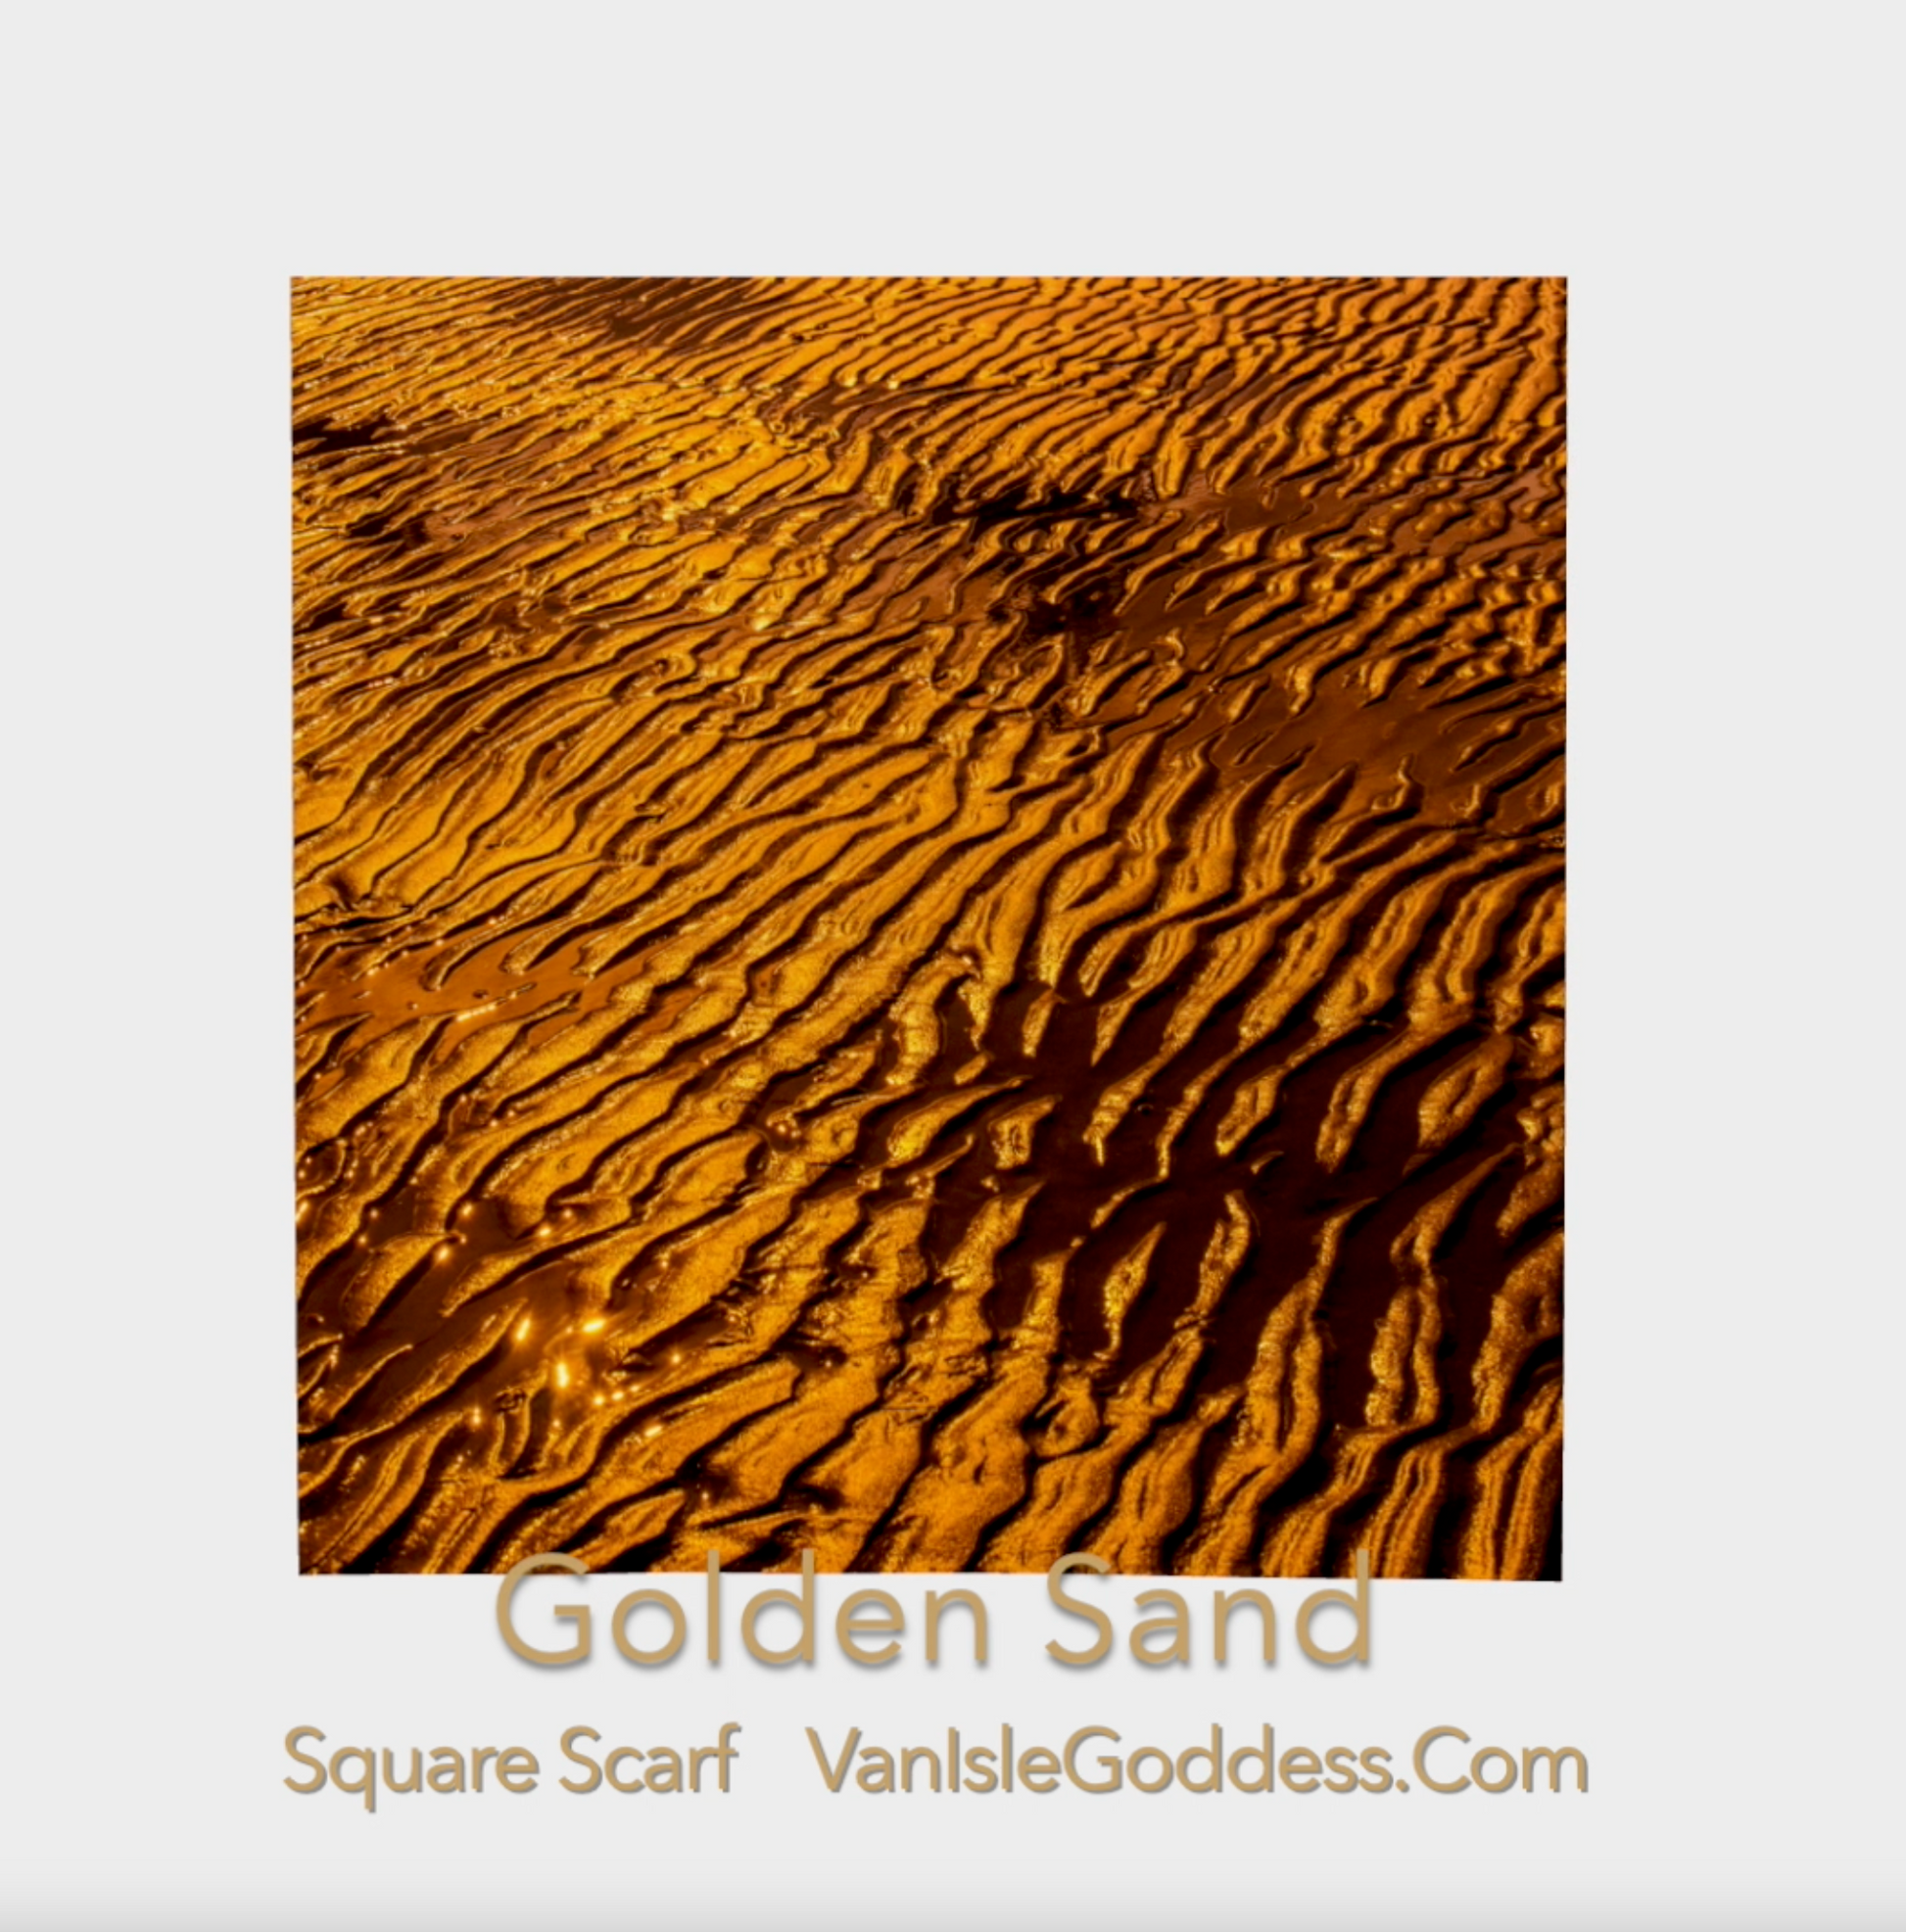 Golden Sand Square Scarf shown  full size.